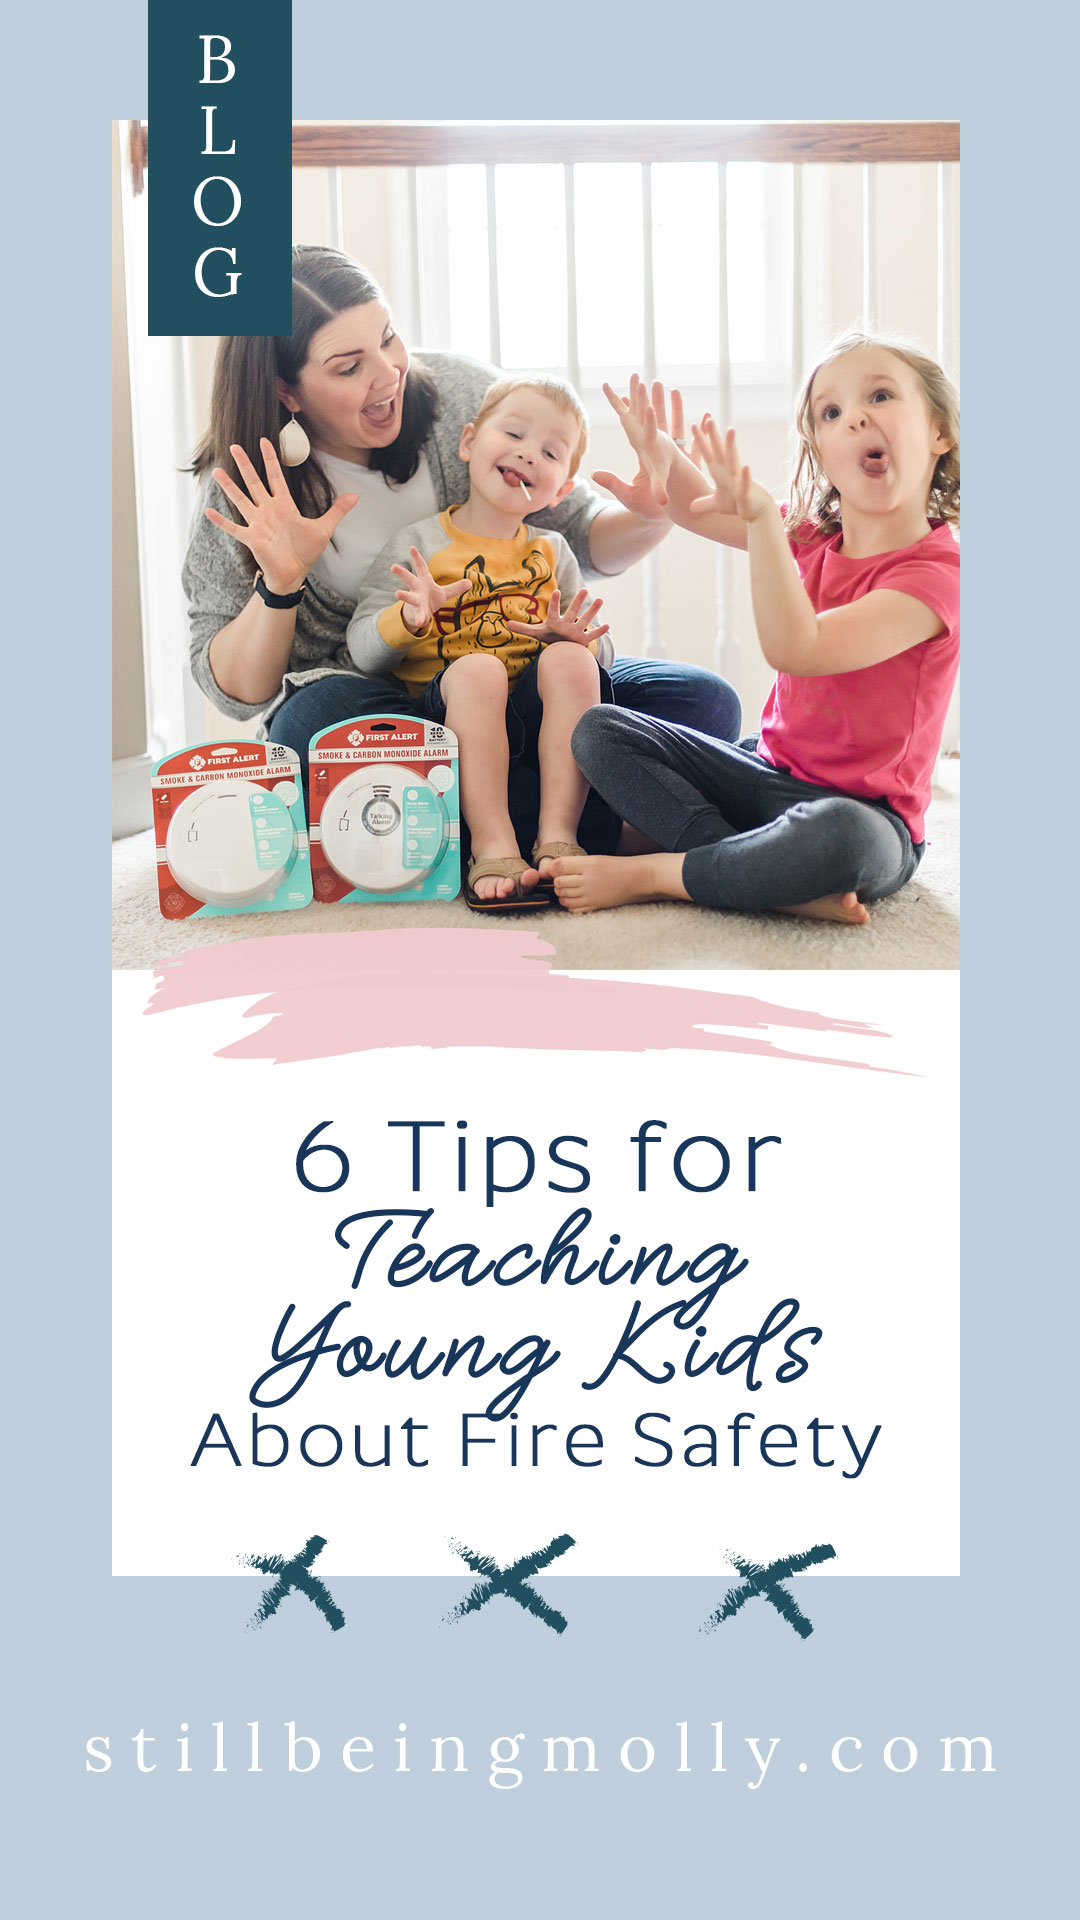 6 Tips for Teaching Young Kids About Fire Safety (12)